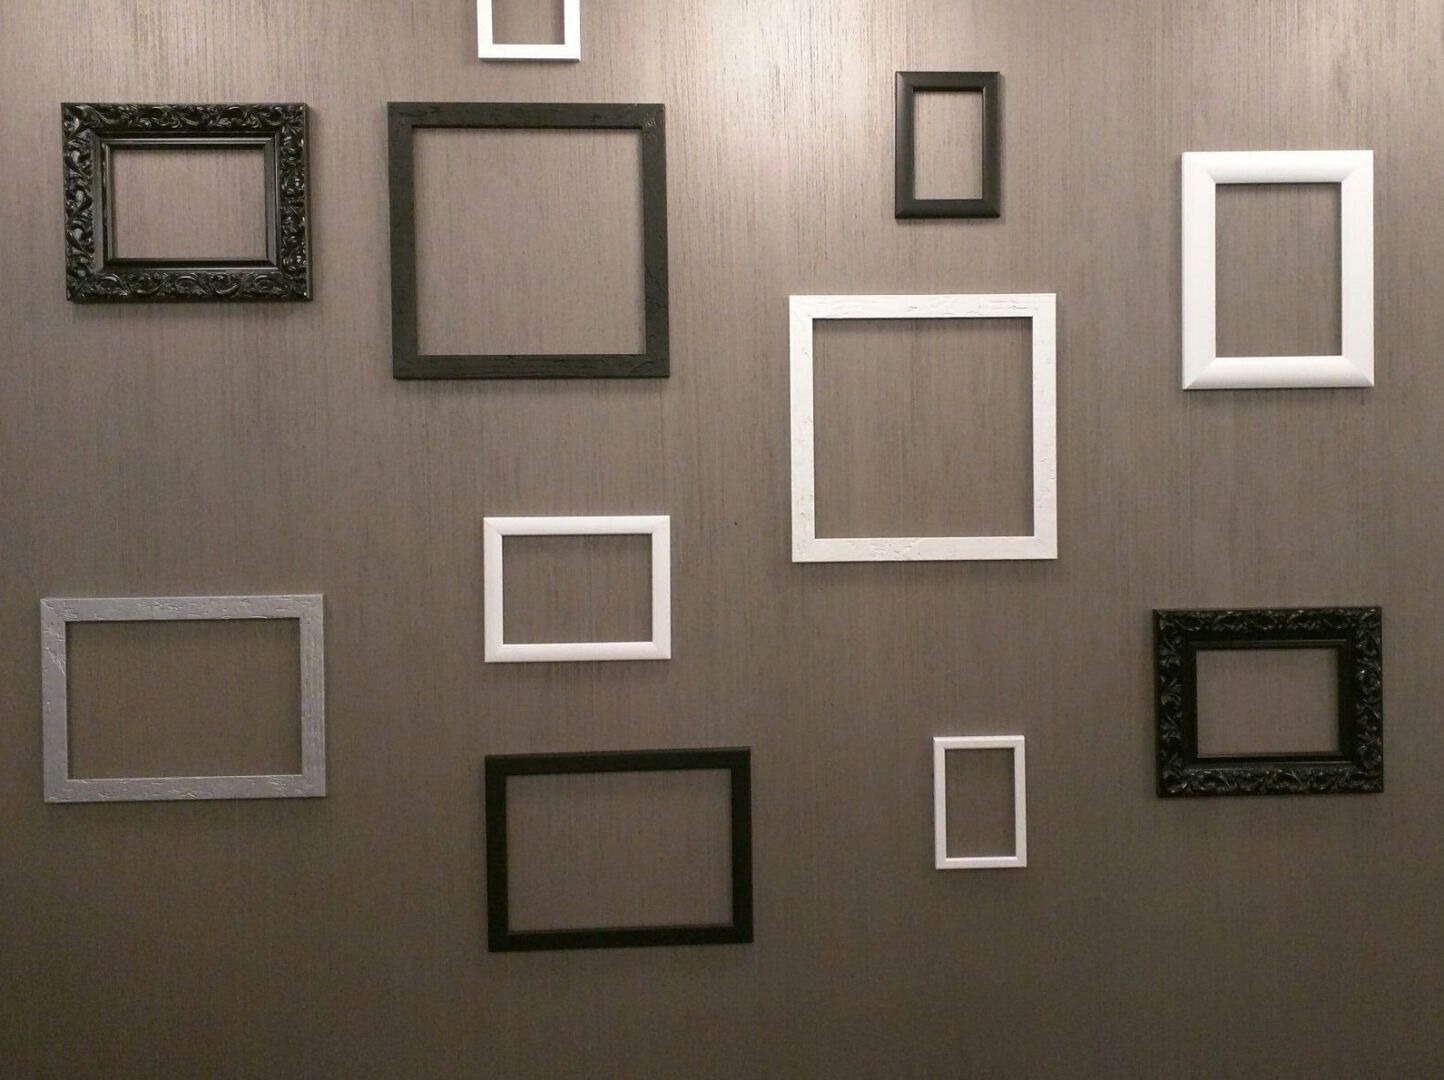 Empty picture frames mounted on a wooden wall